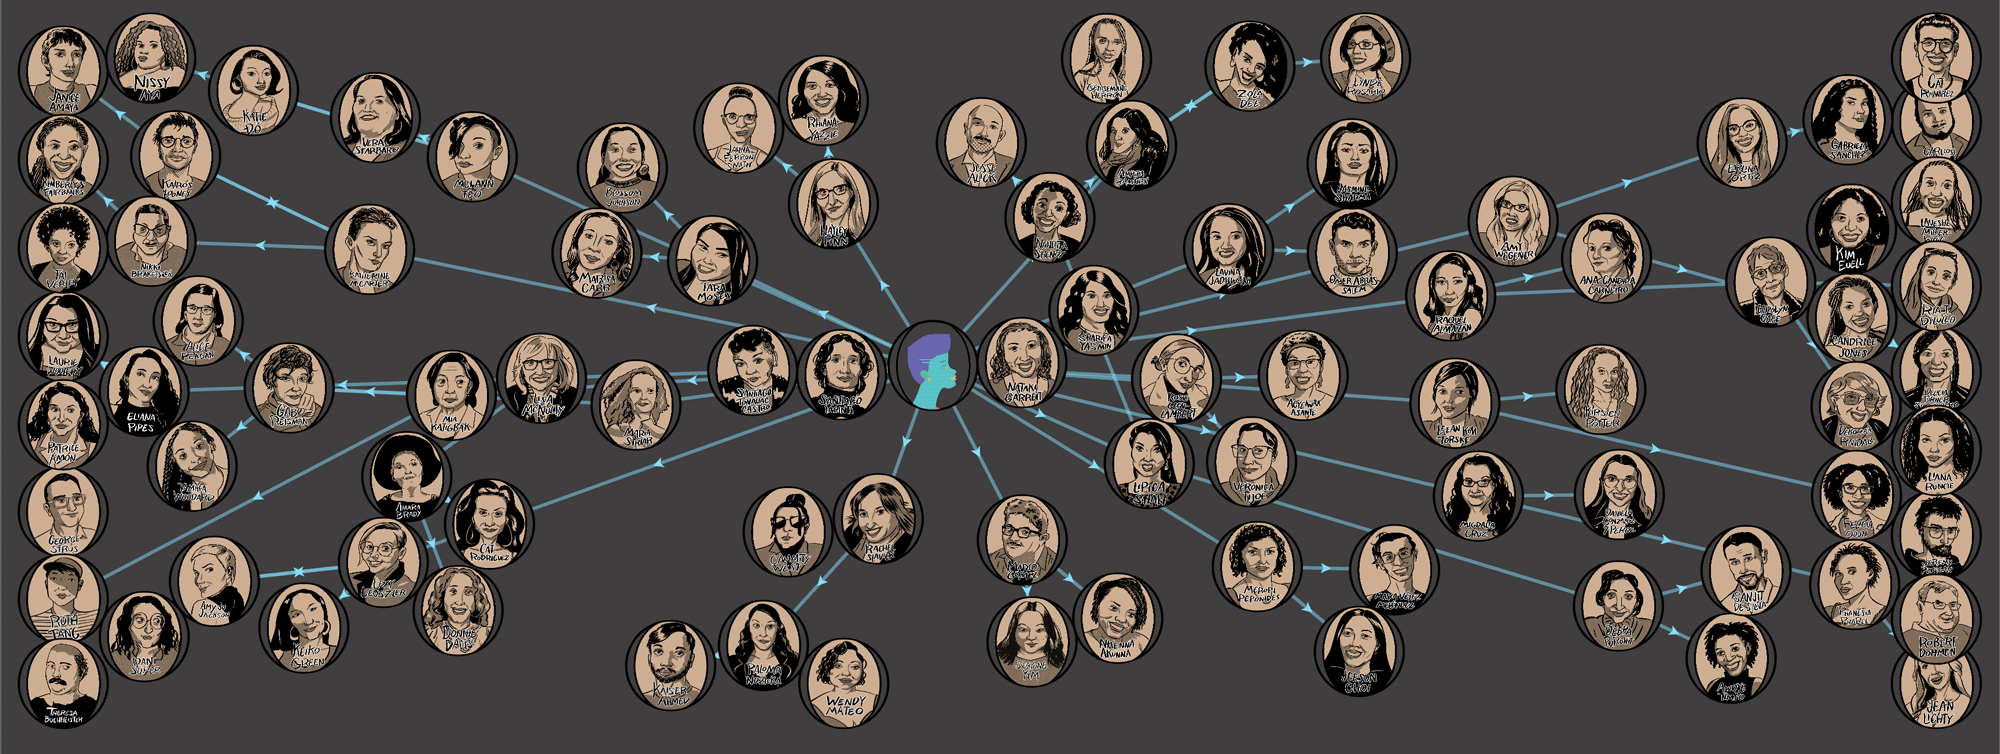 web of playwright's illustrated faces connected by lines and arrows